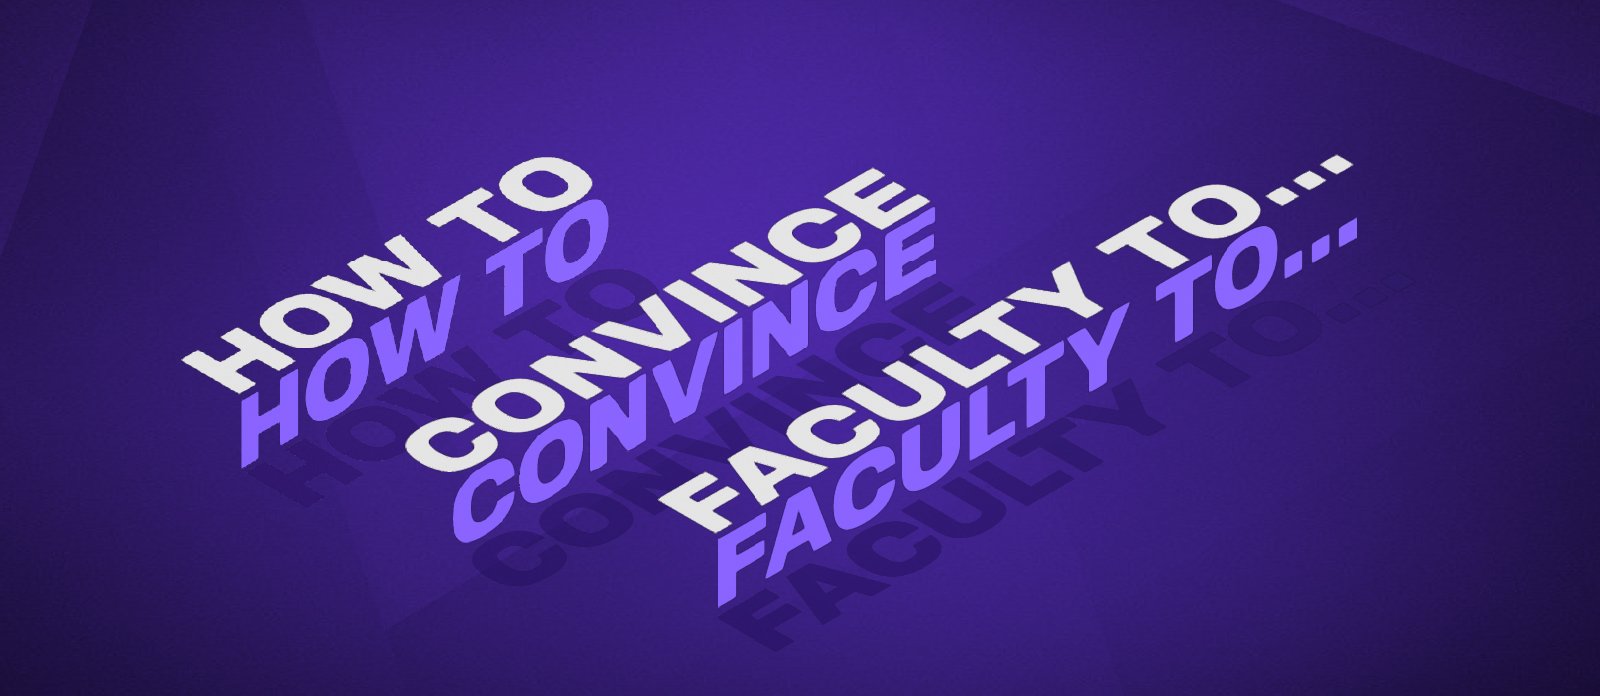 Convince Faculty